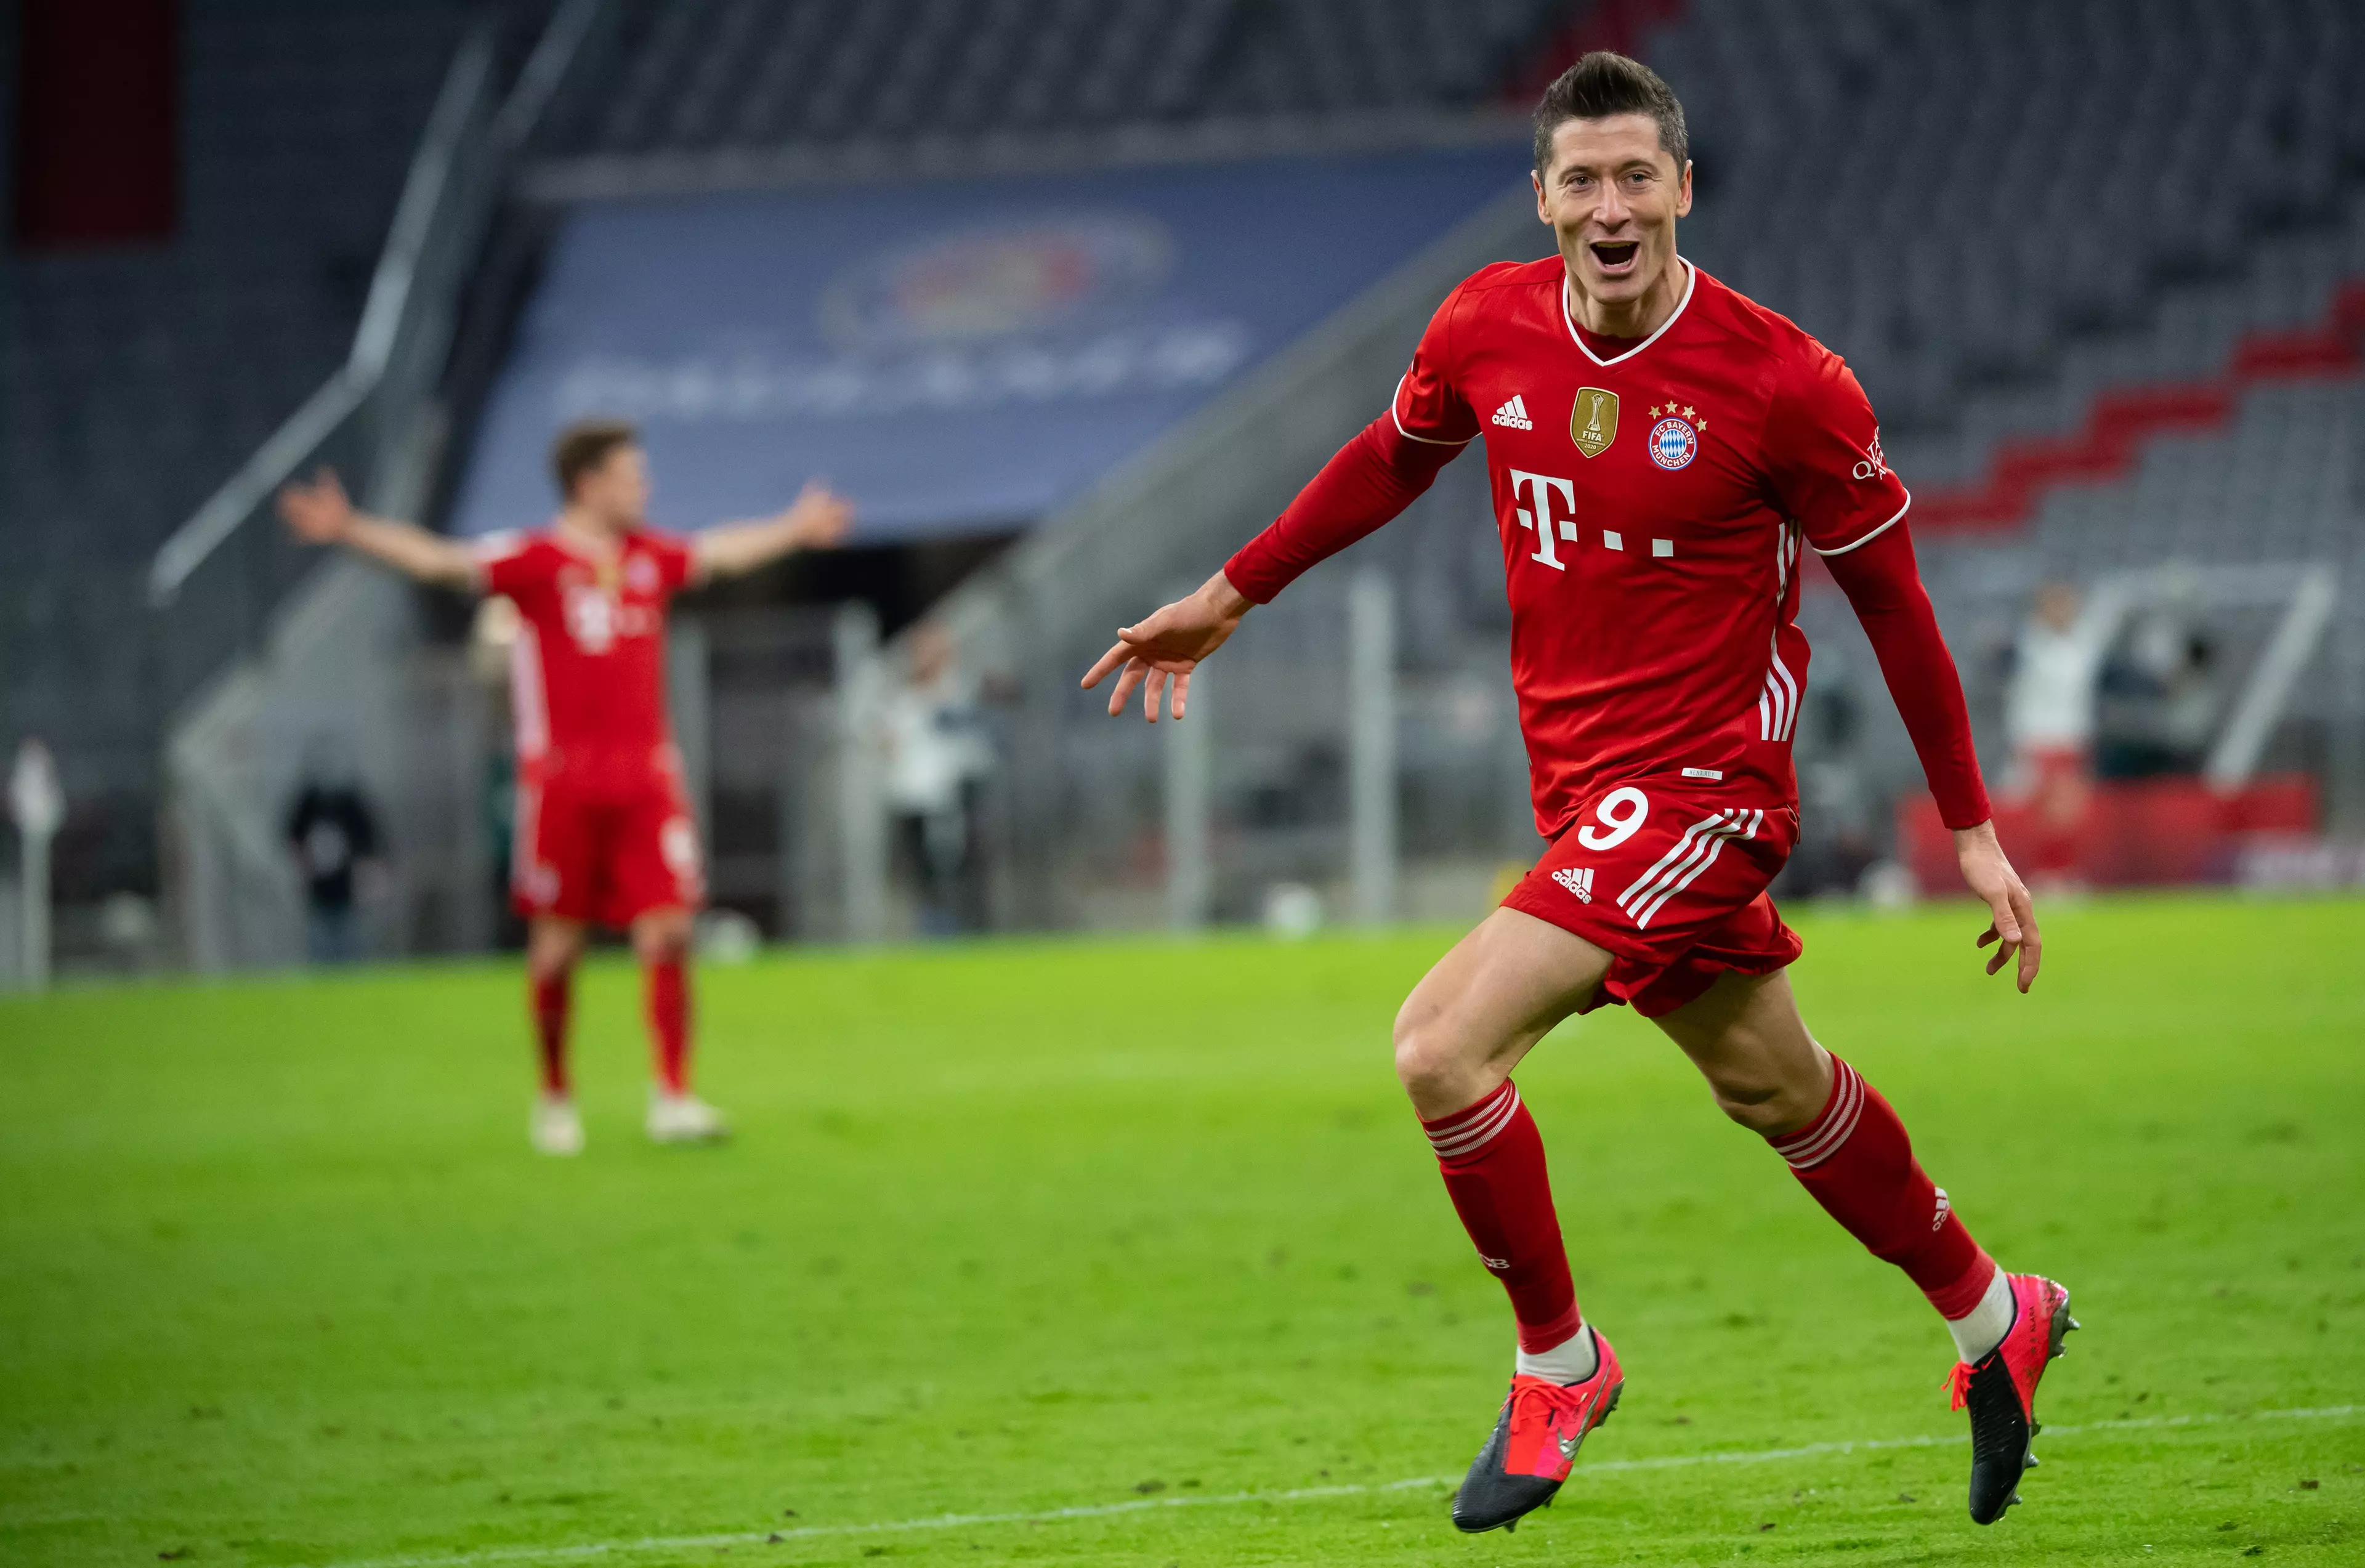 Lewandowski would be an incredible signing for City or Chelsea. Image: PA Images